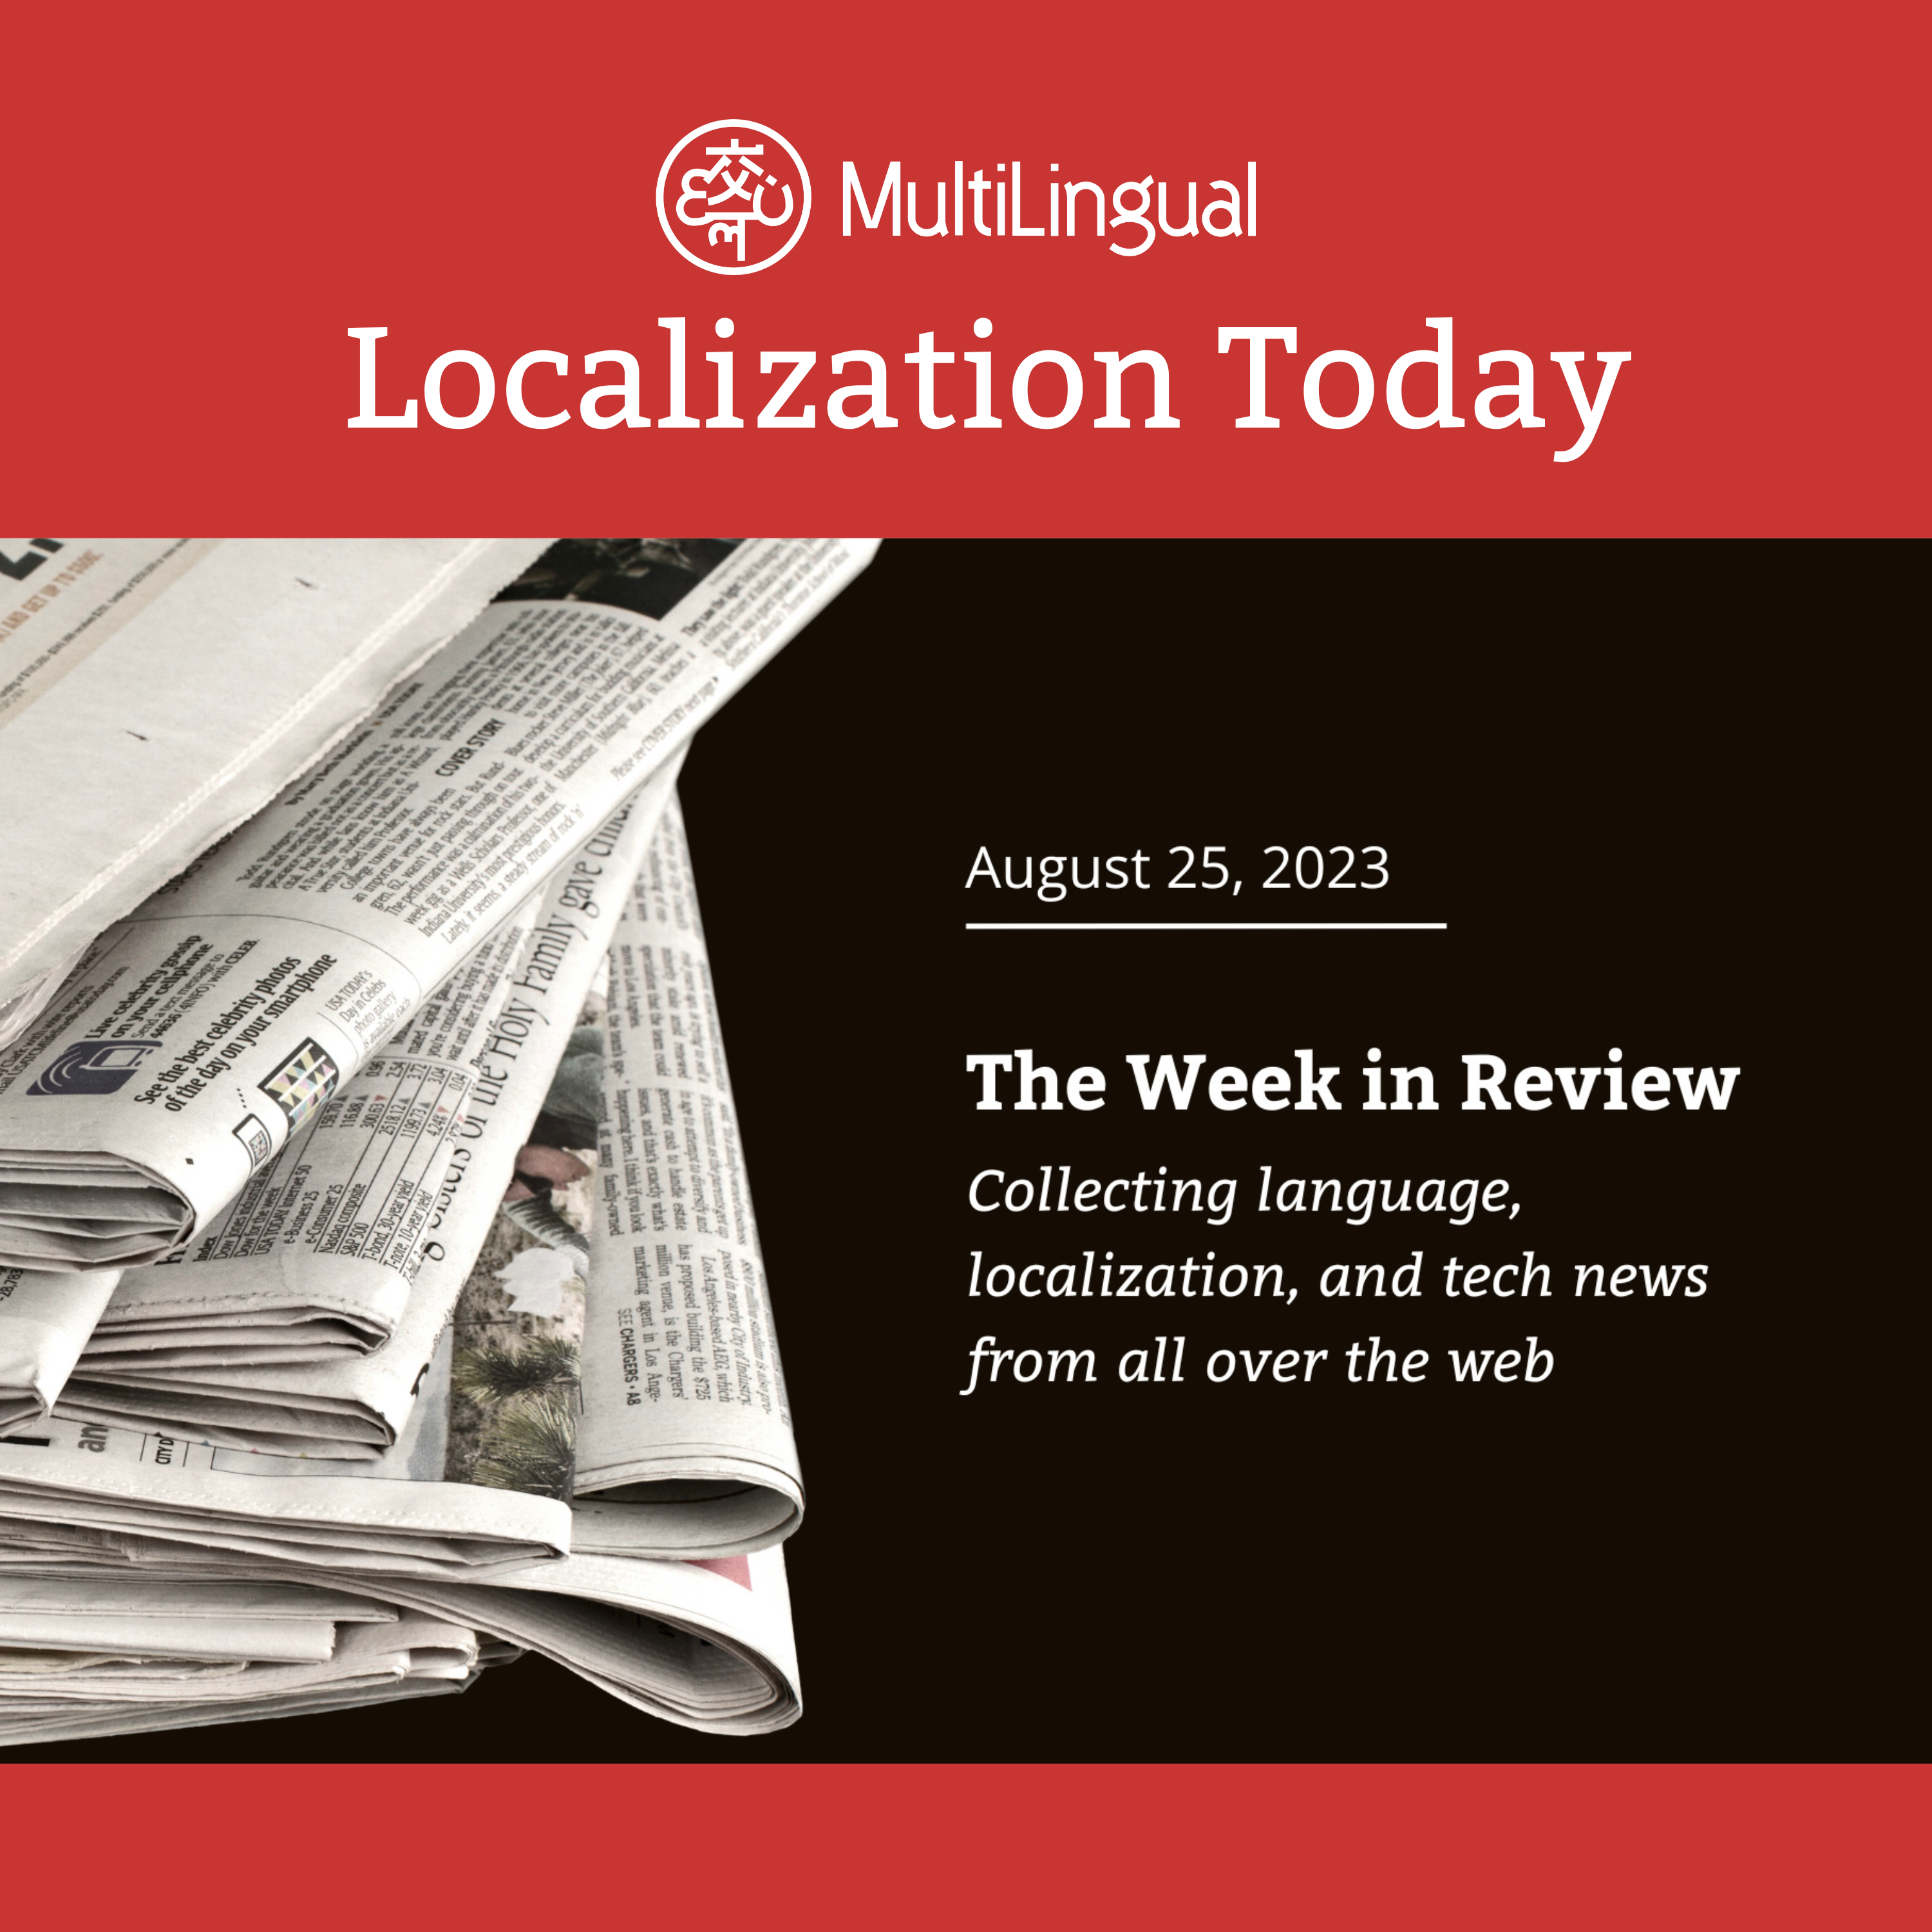 The Week in Review: August 25, 2023